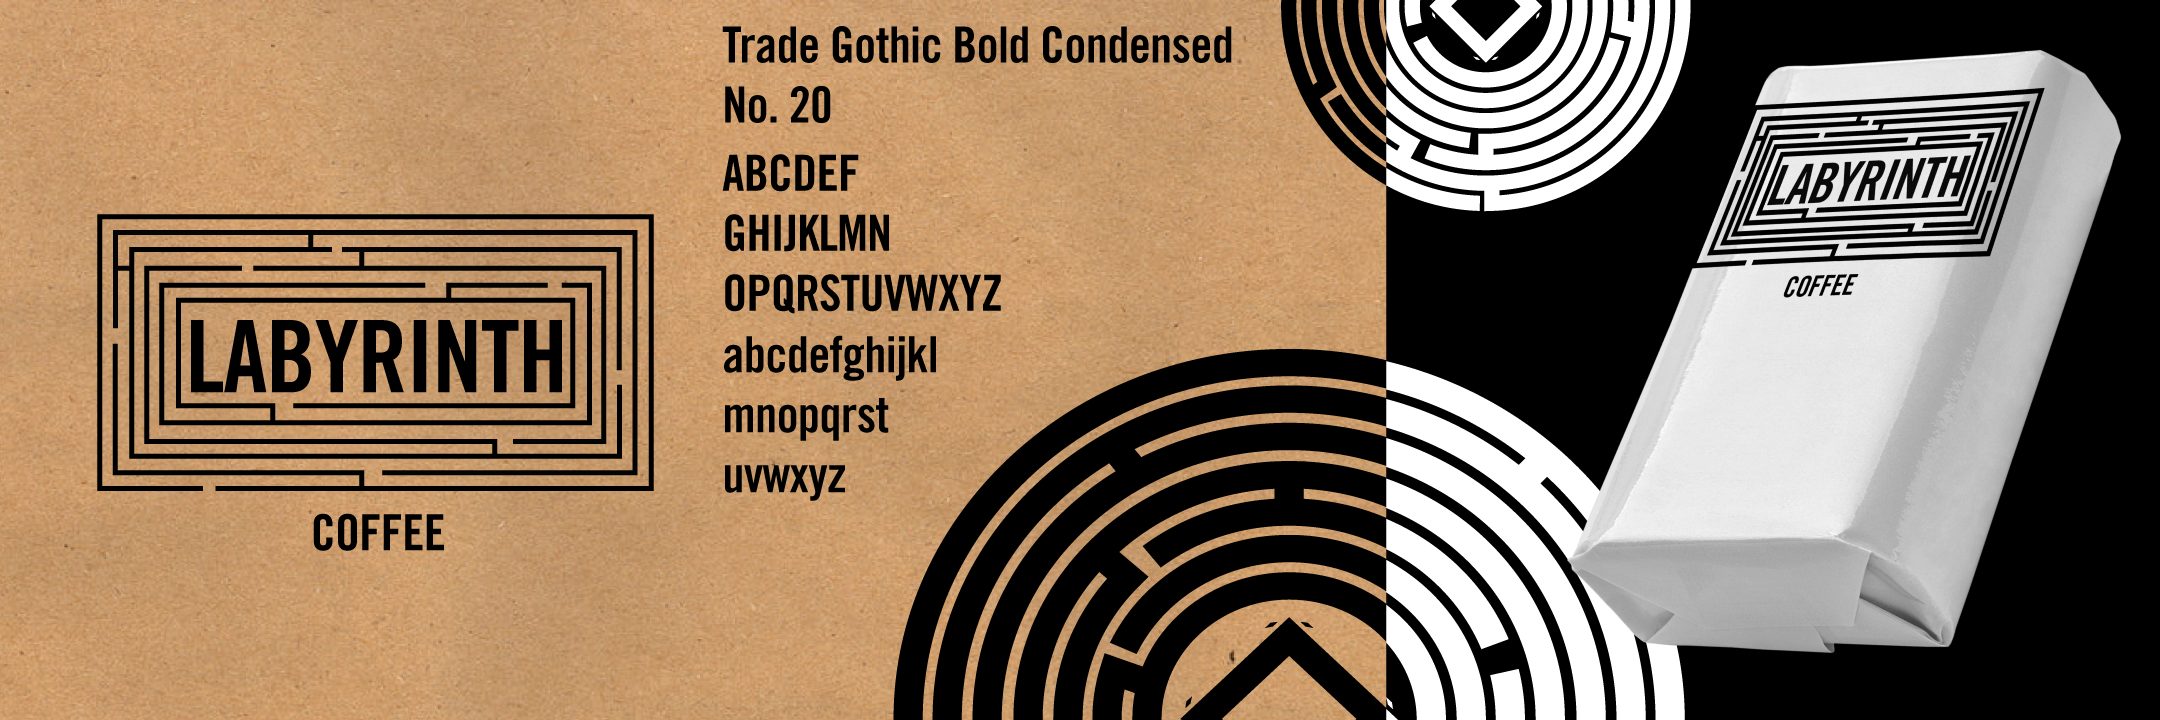 labyrinth coffee style guide design